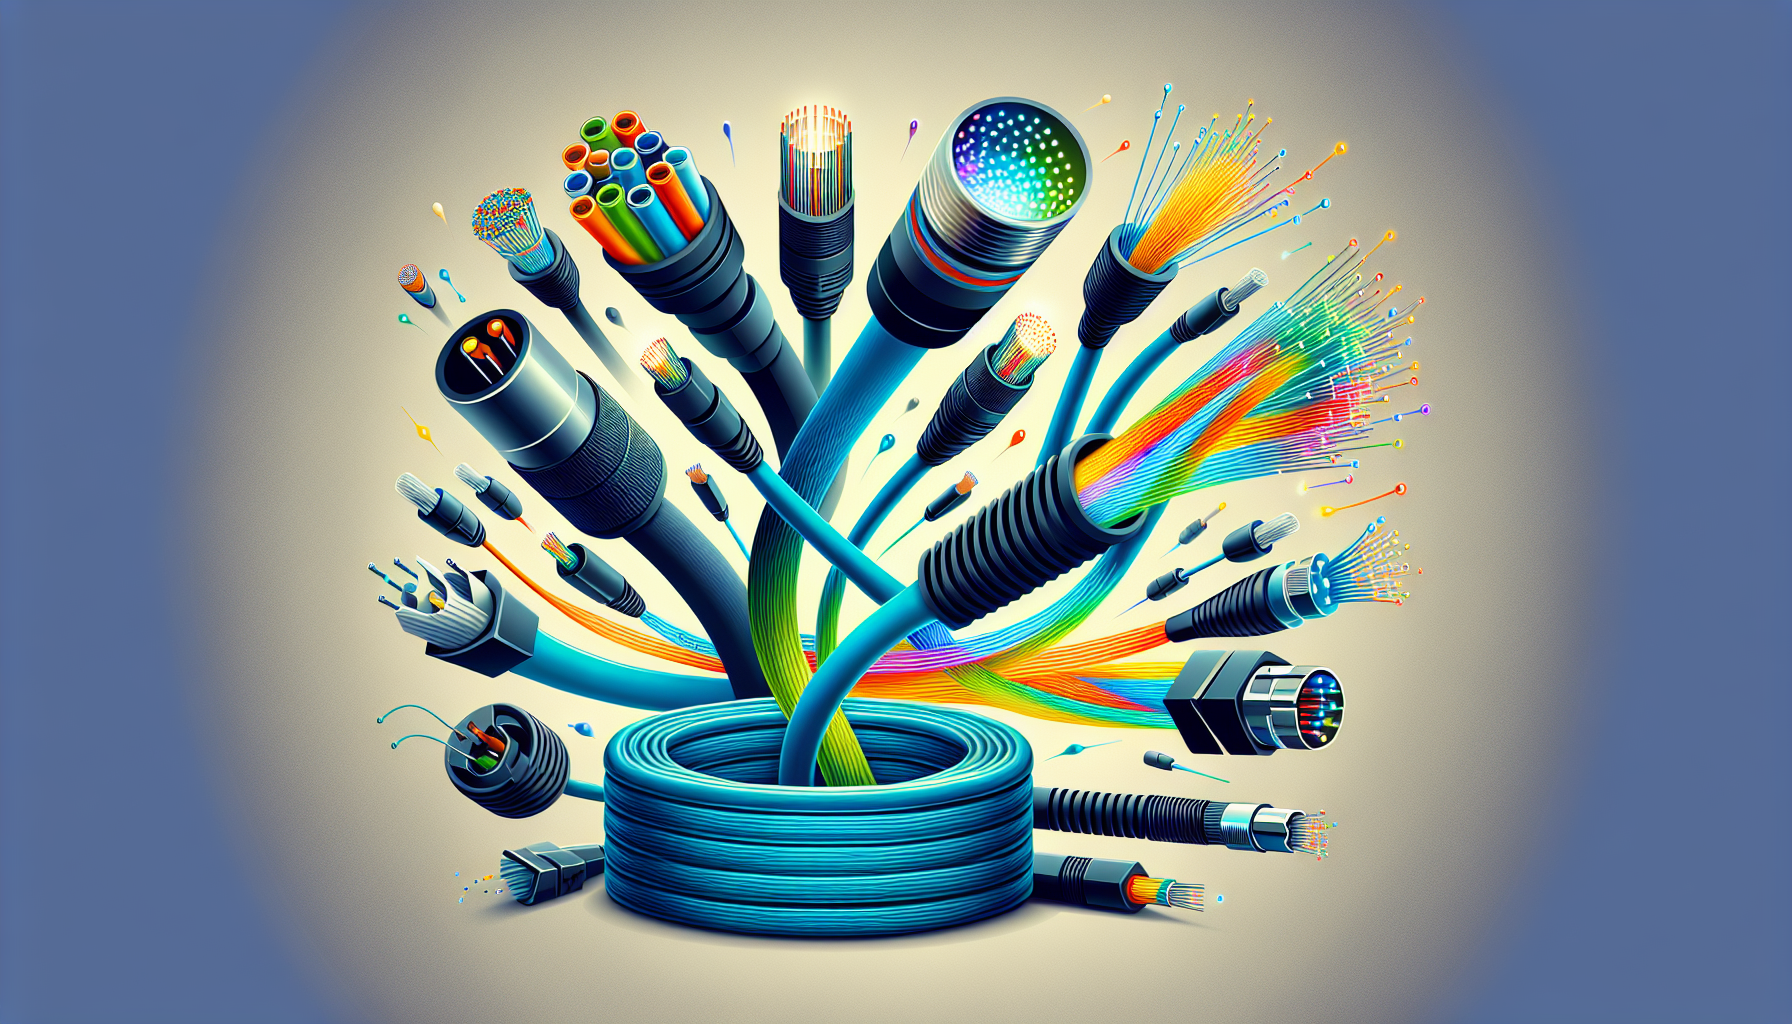 Different types of low voltage cables - category cables, coaxial cables, and fiber optic cables